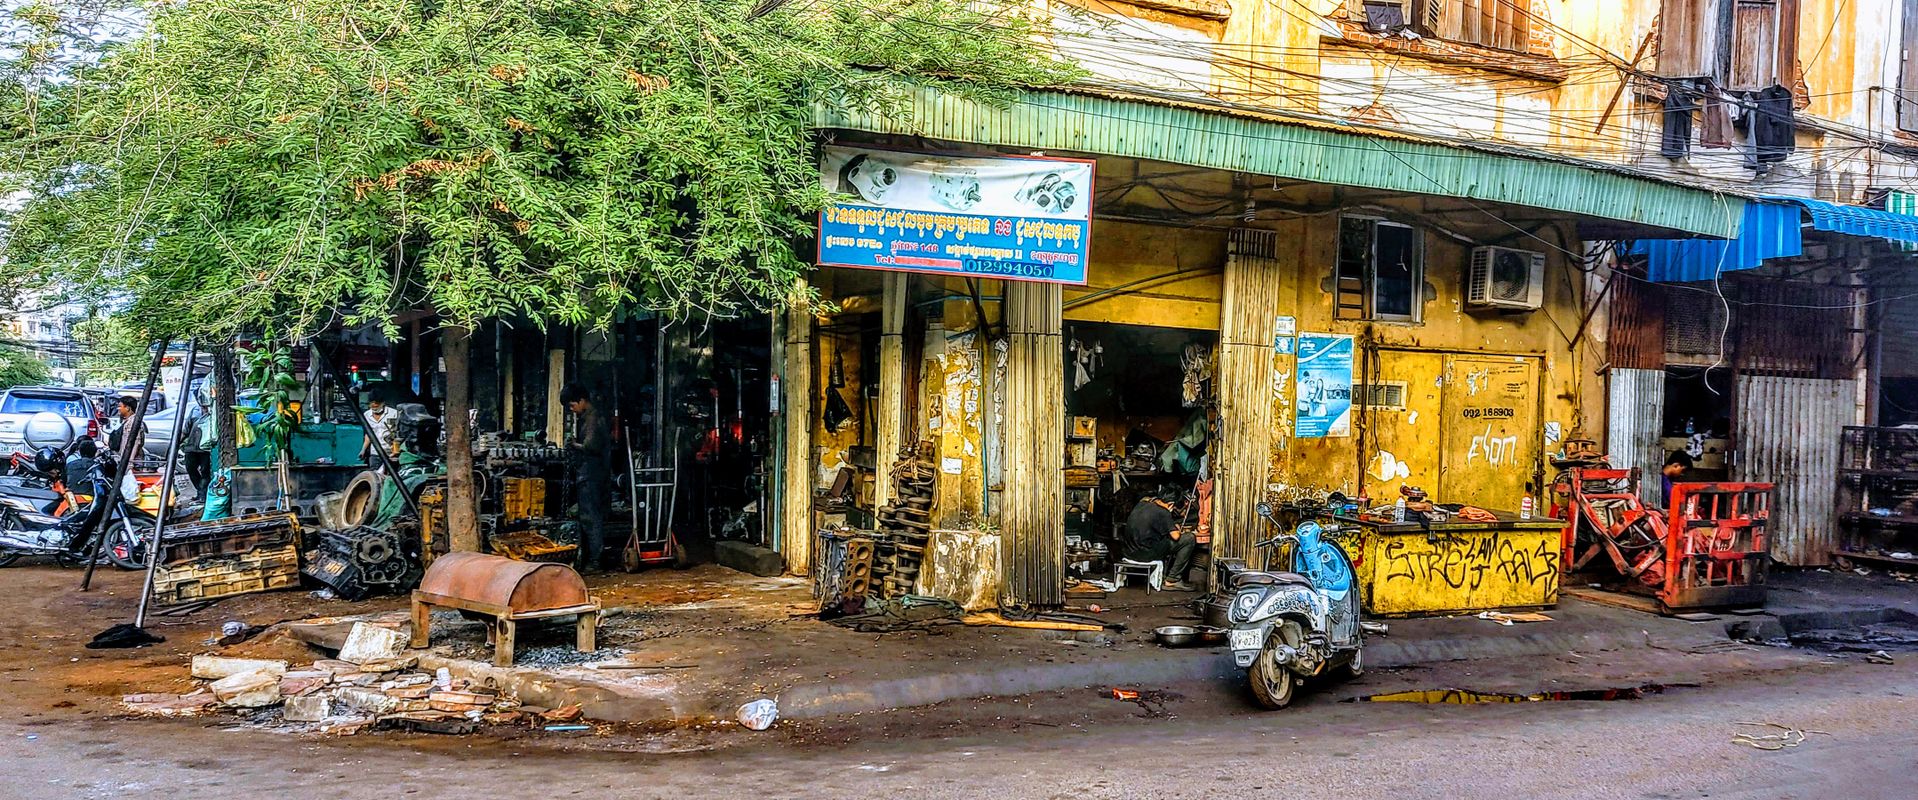 A car mechanic's workshop in the heart of Phnom Penh